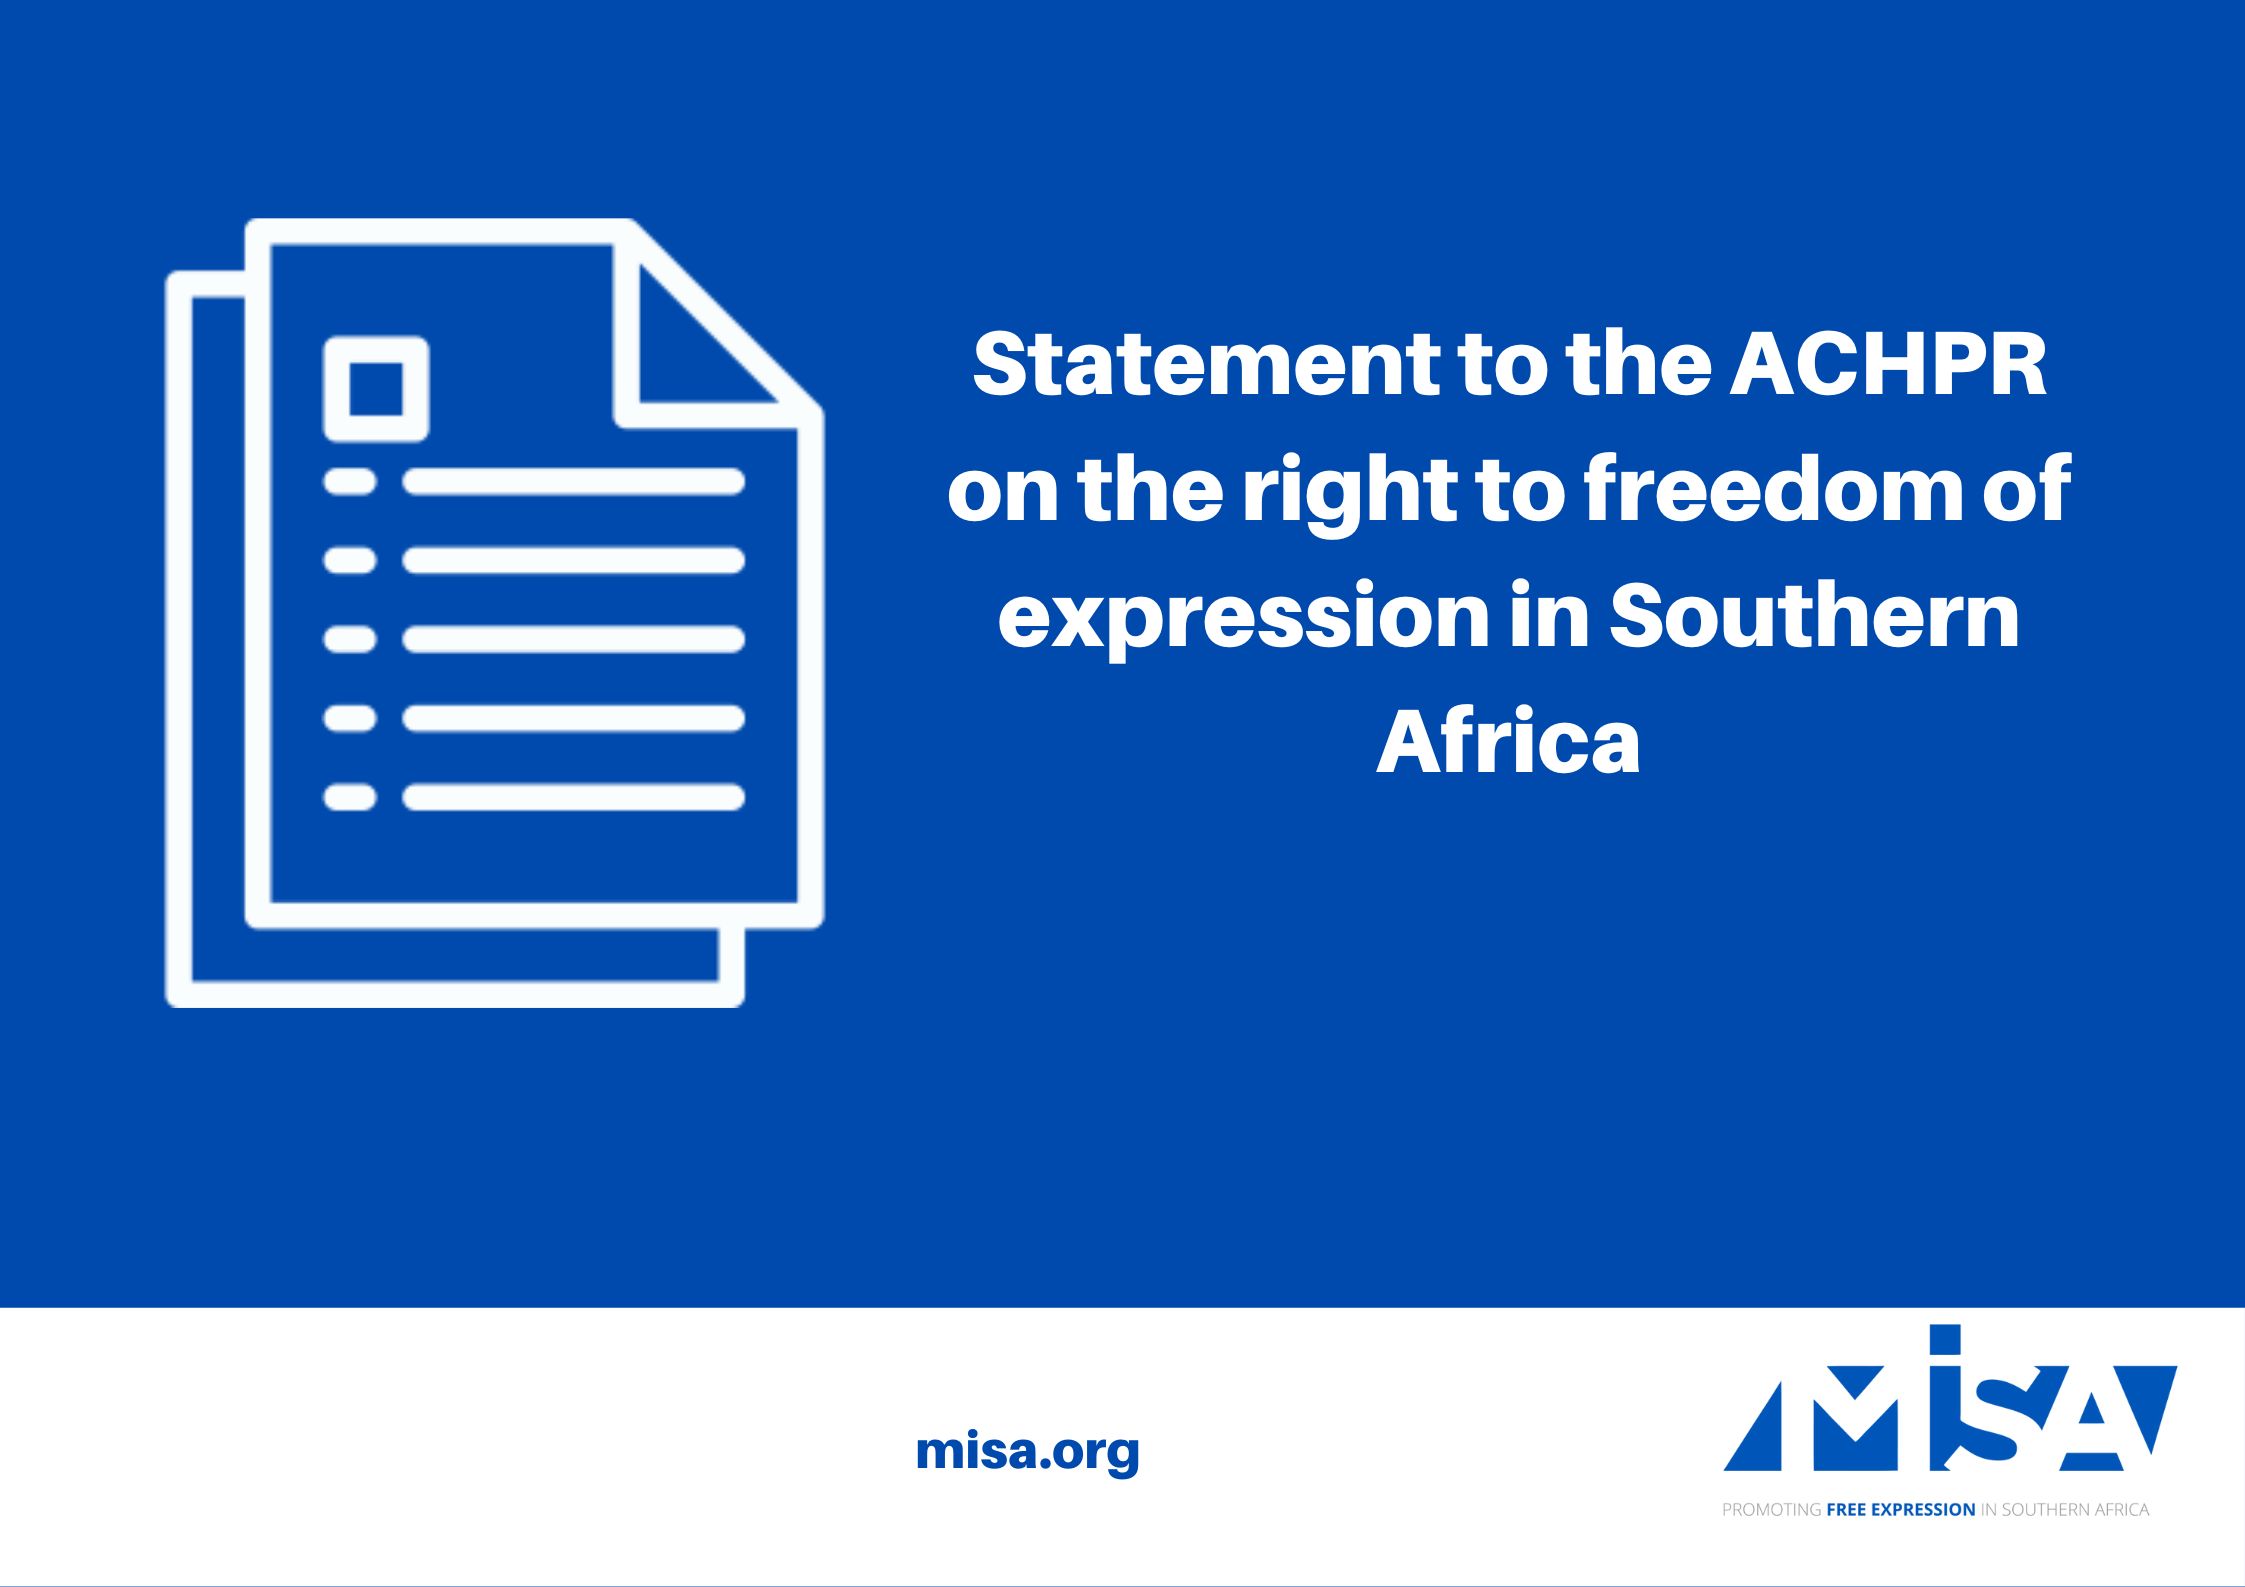 Statement to the ACHPR on the right to freedom of expression in Southern Africa 